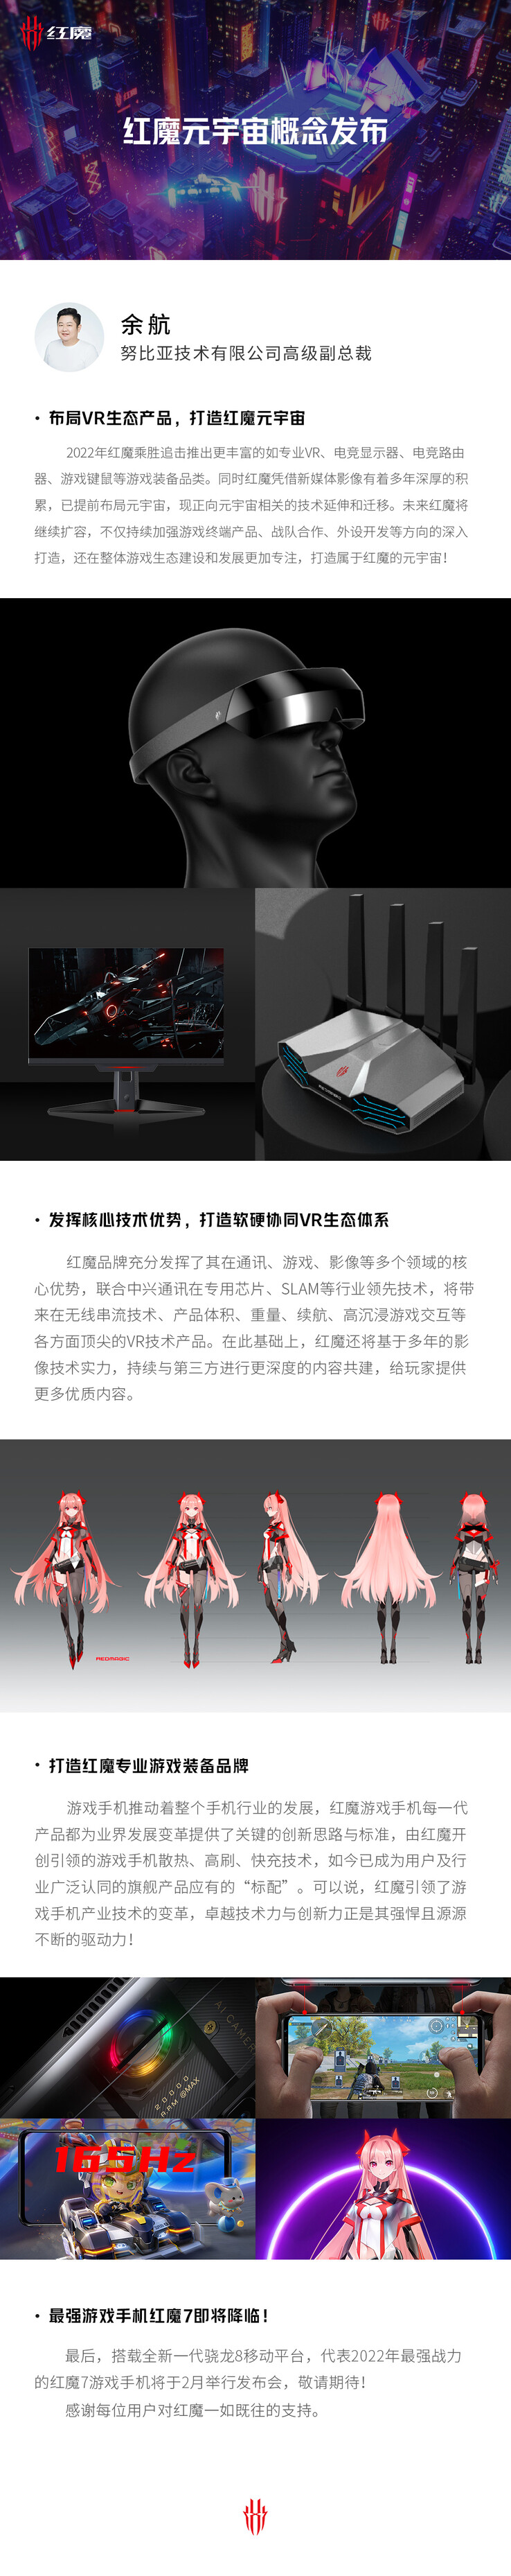 RedMagic drops multiple new product hints in the same poster. (Source: RedMagic via Weibo)